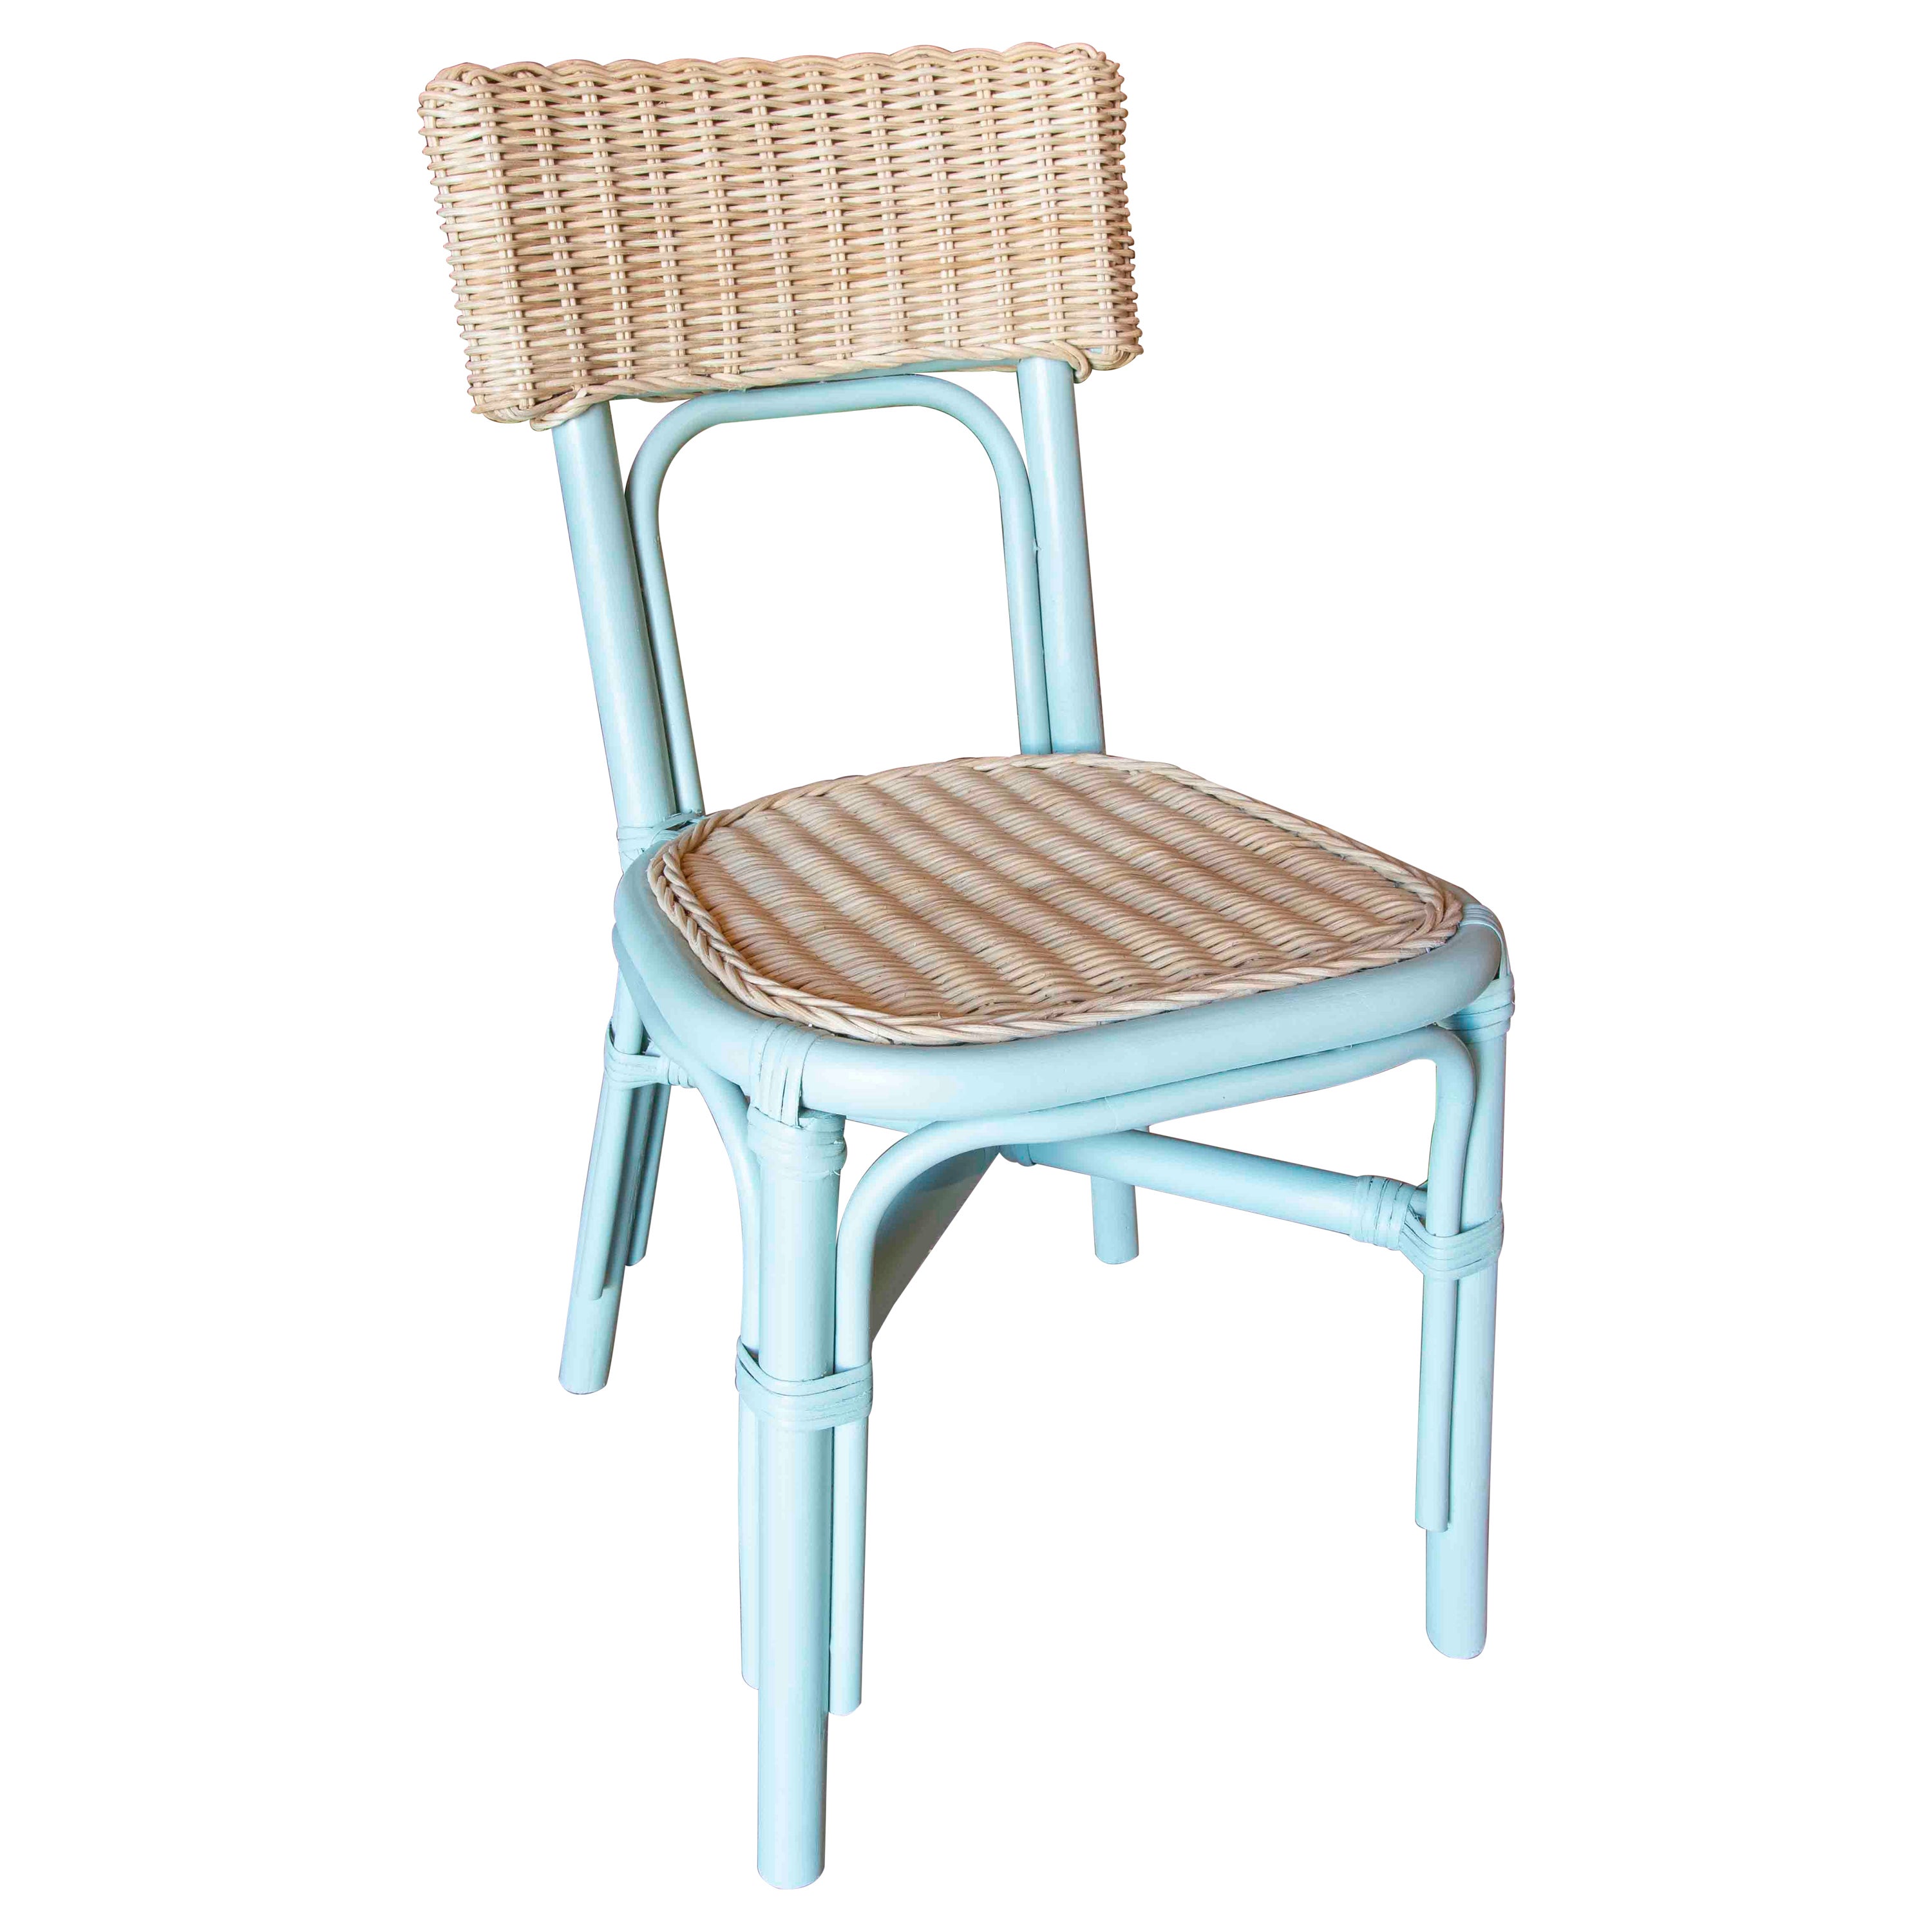 Handmade Wicker and Rattan Children's Chair in Natural Colour & Painted in Blue For Sale